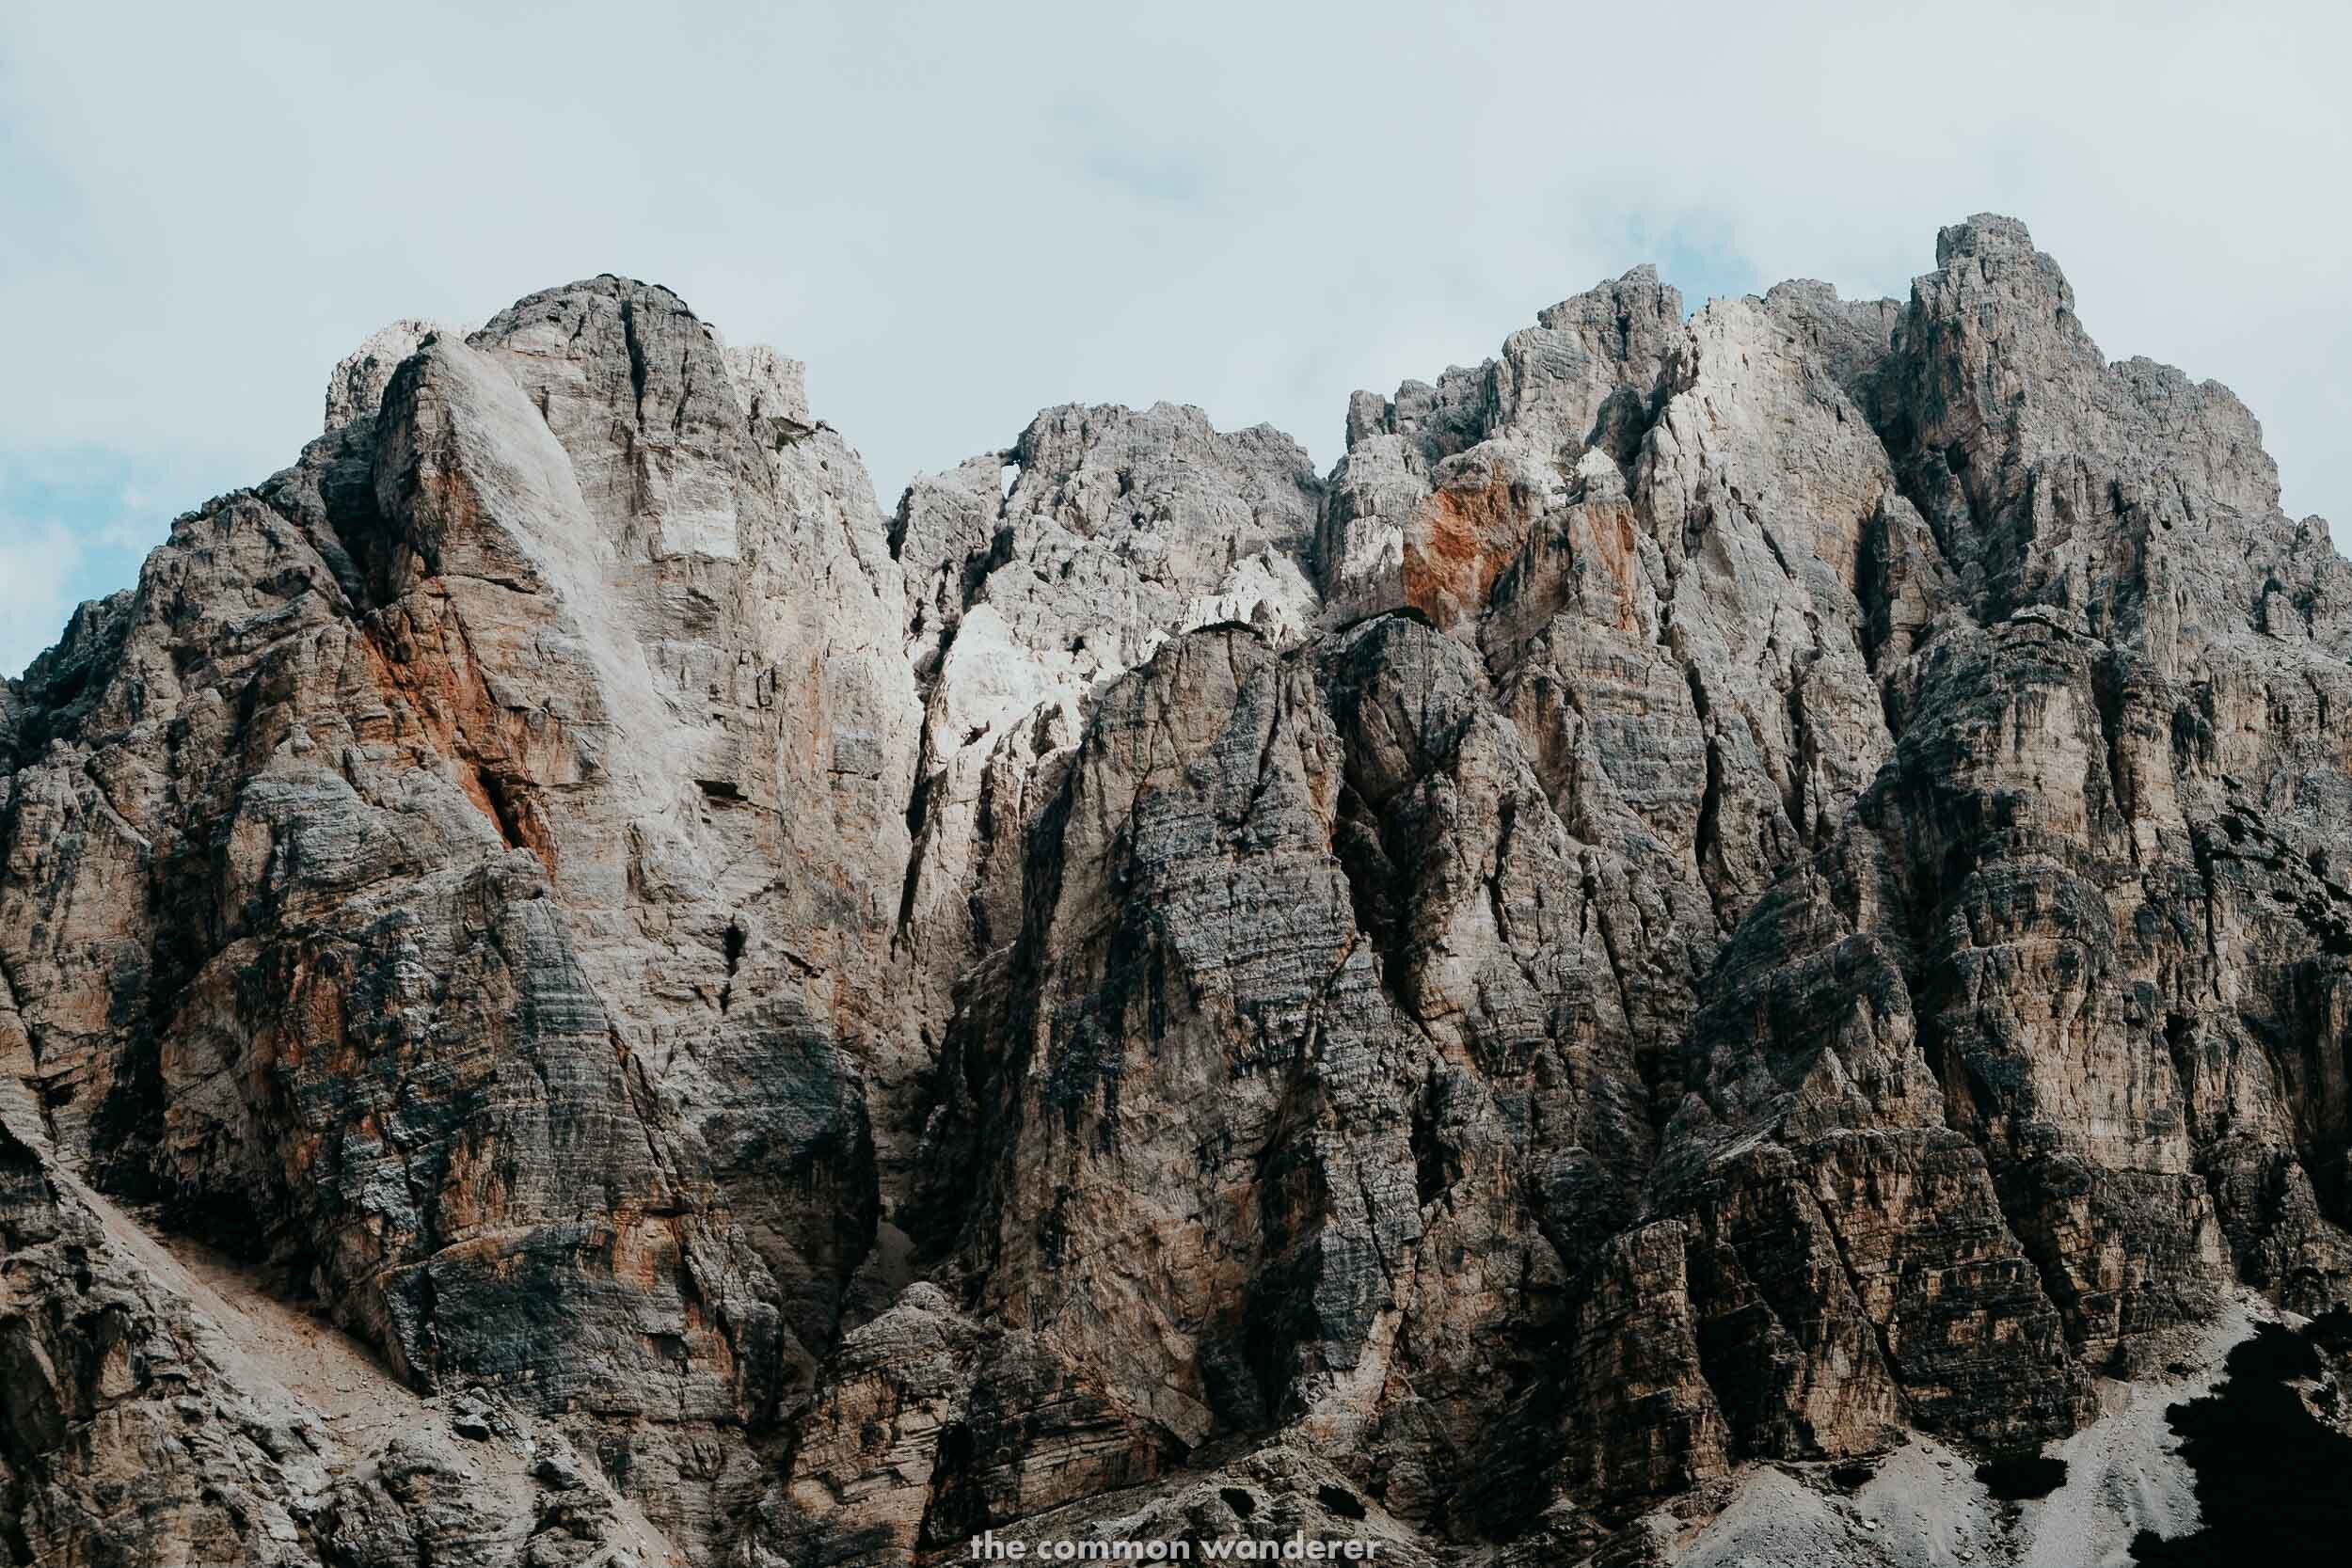 Layers of rock in Fanes National Park, Dolomites